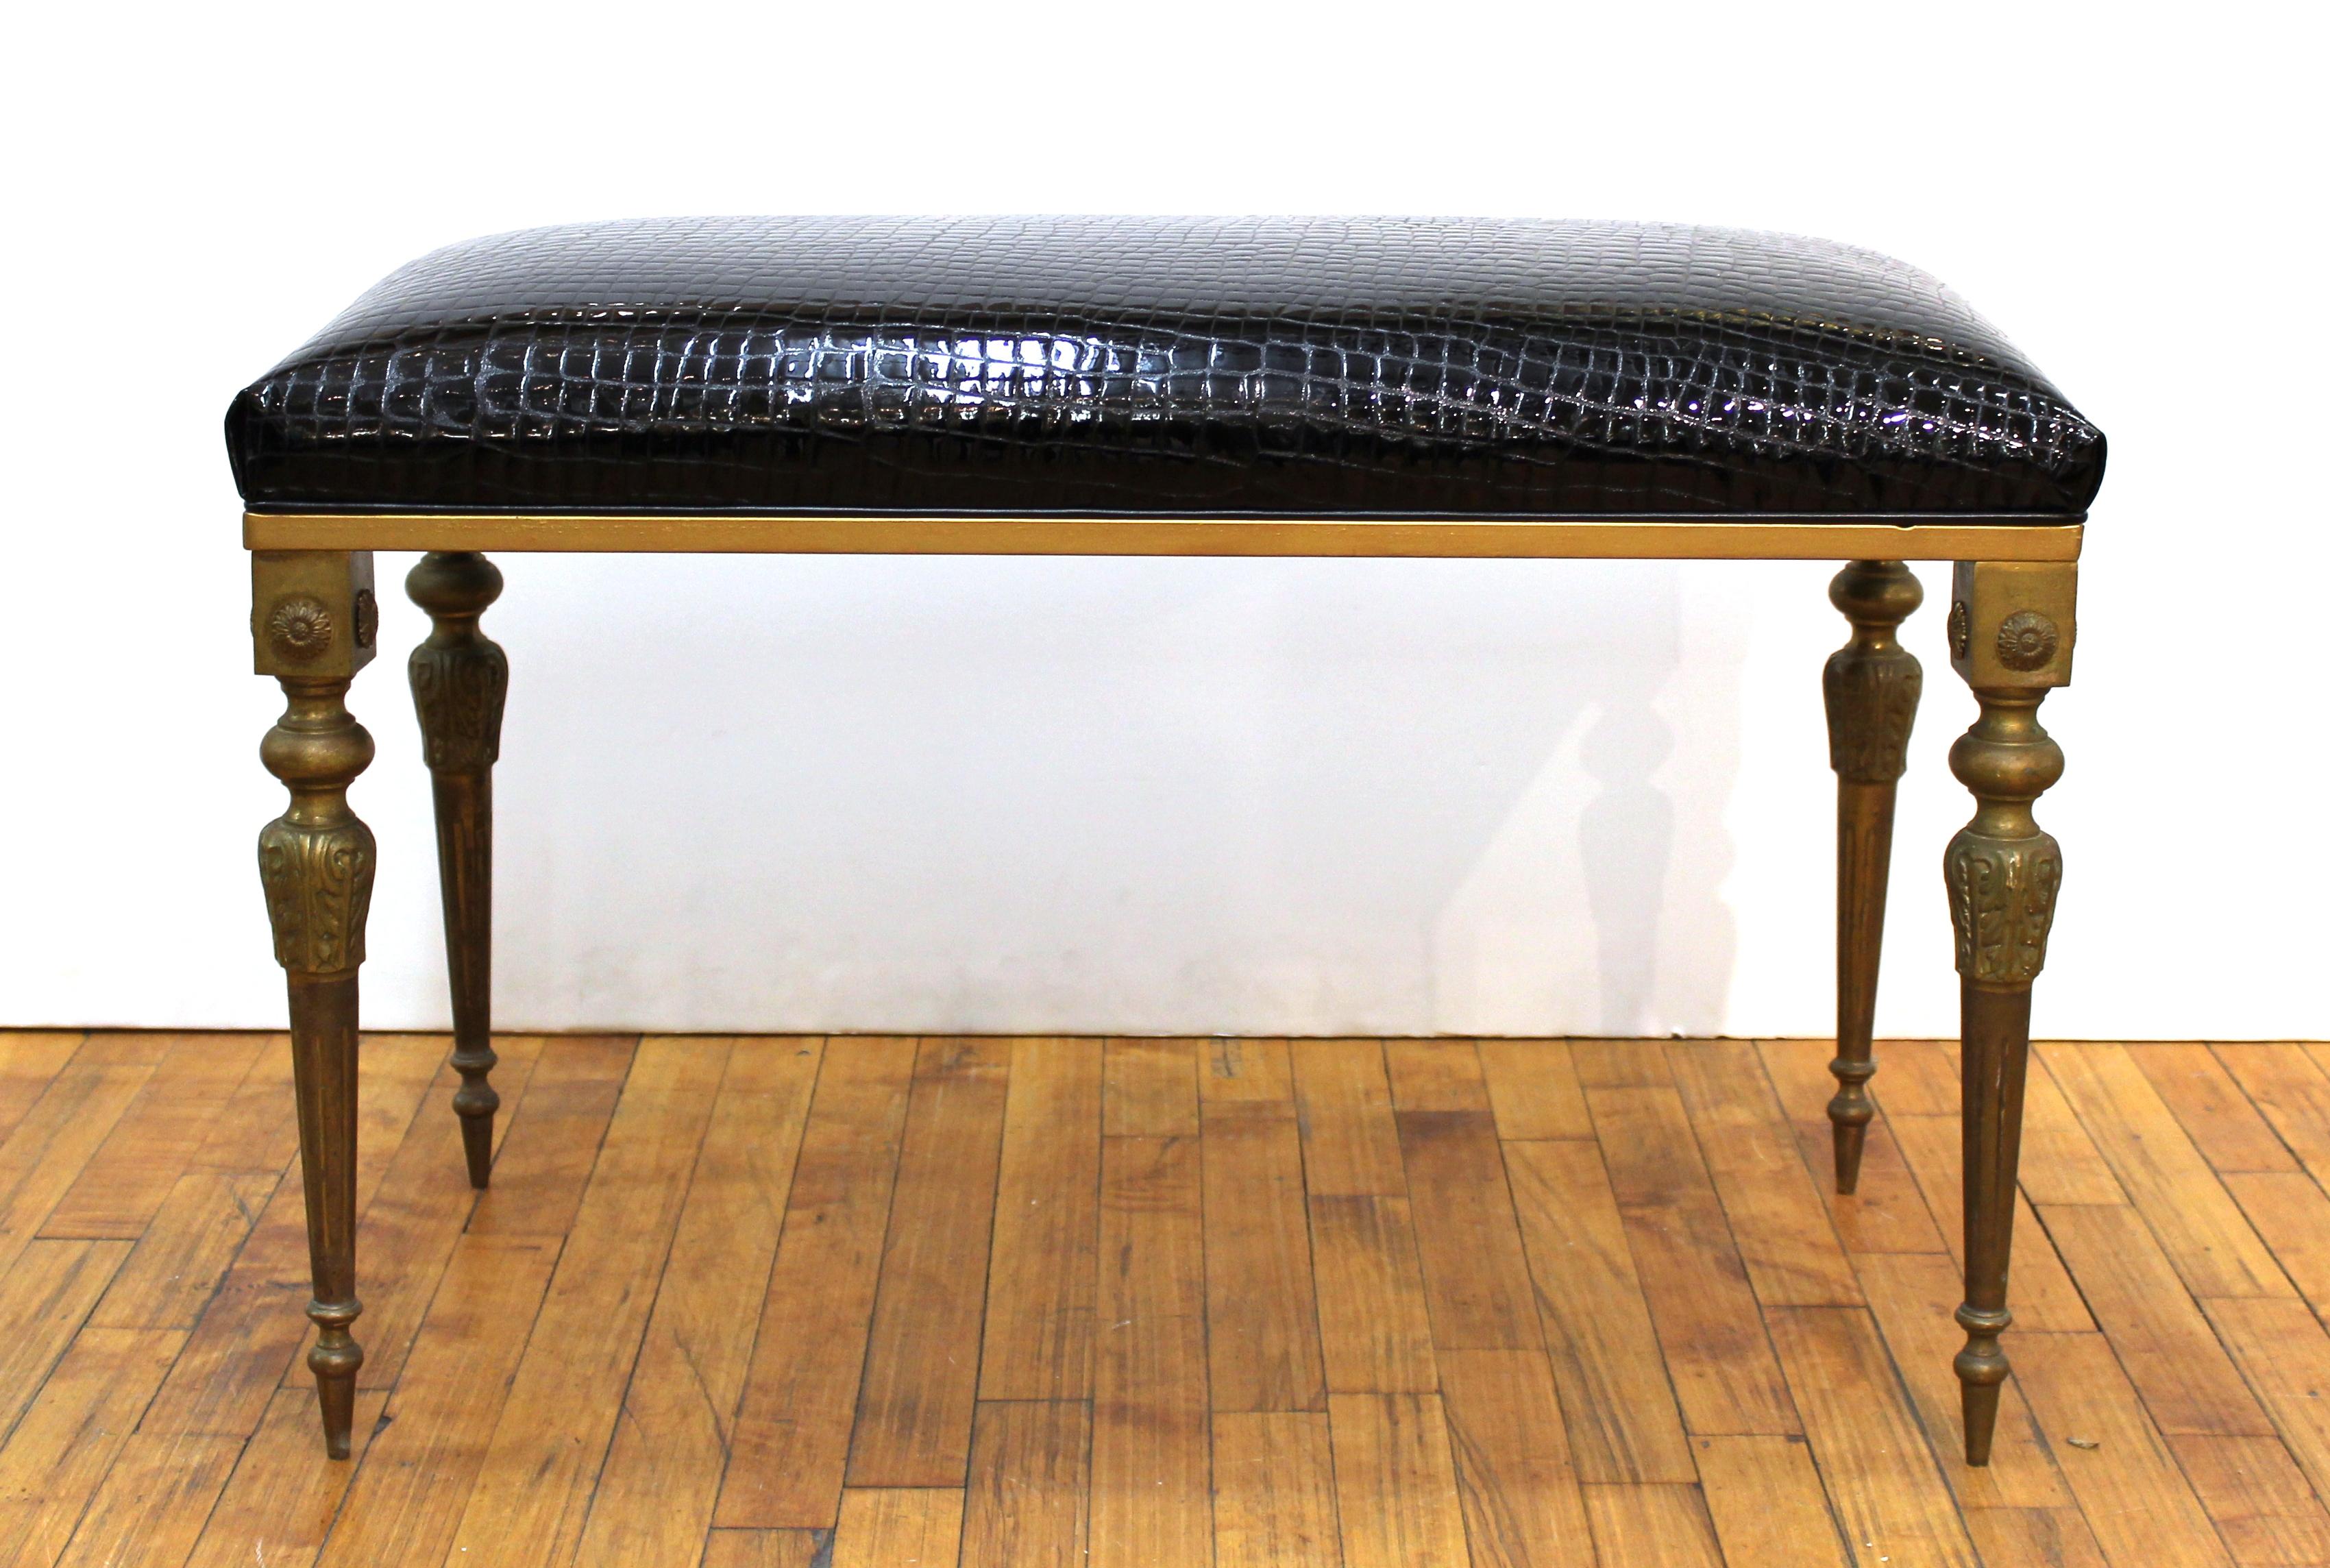 Italian midcentury bronze bench with faux alligator black patent leather seat upholstery. Each leg has 4 decorative rosettes on the top. Made in Italy in the 1950s.
In great vintage condition with age-appropriate wear and use.